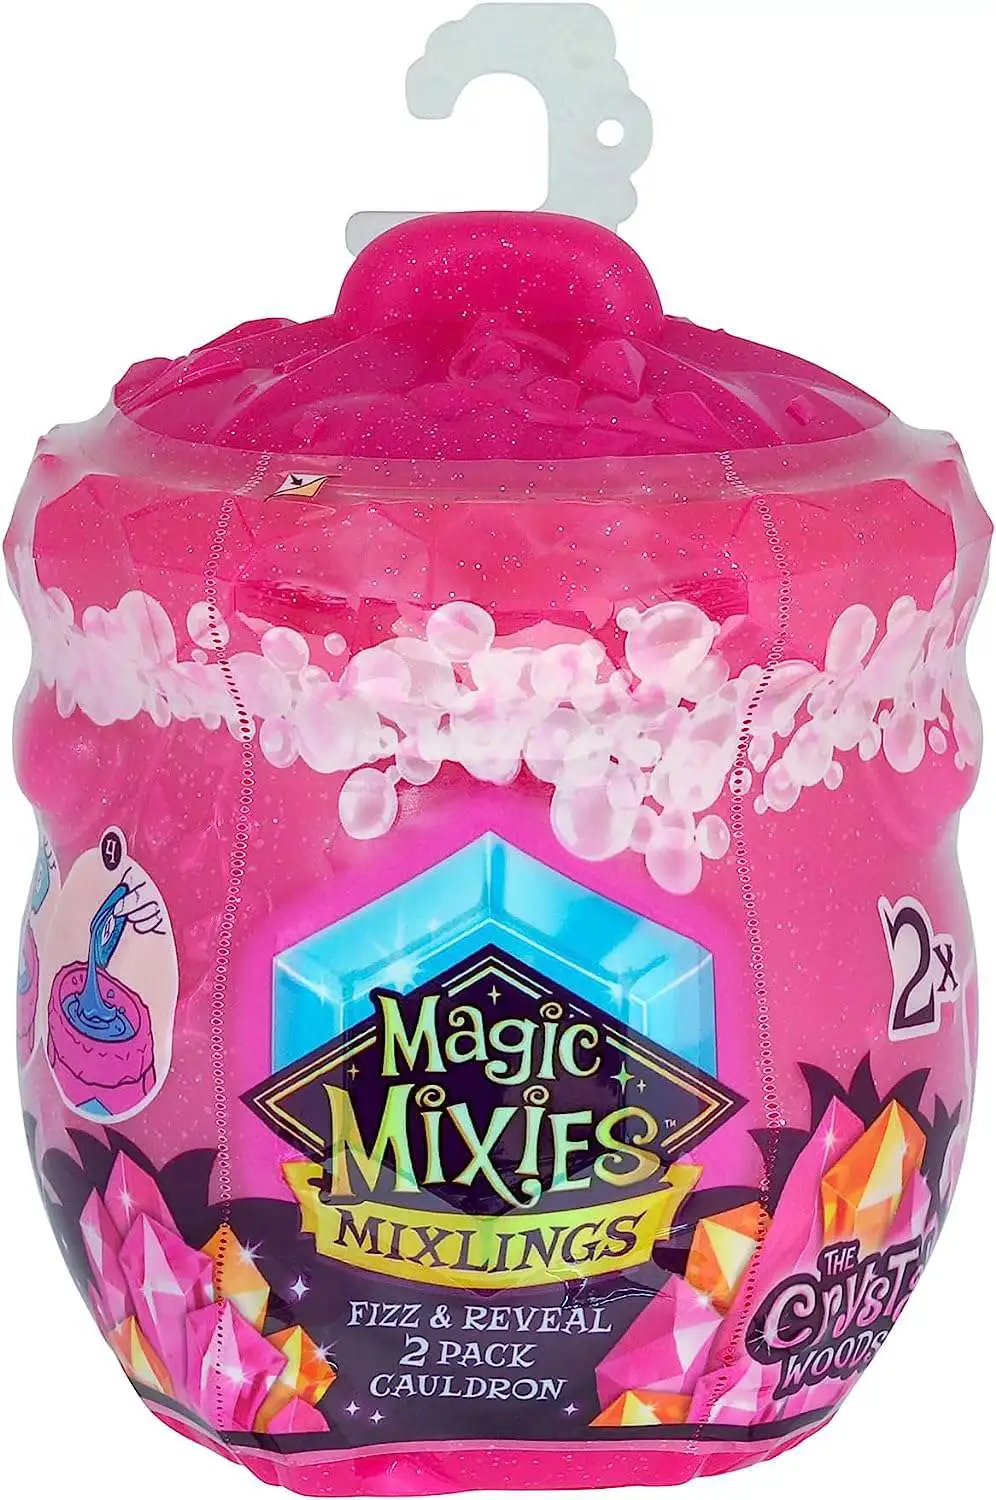 New! Magic Mixies Mixlings Cauldrons Each One Has a Special